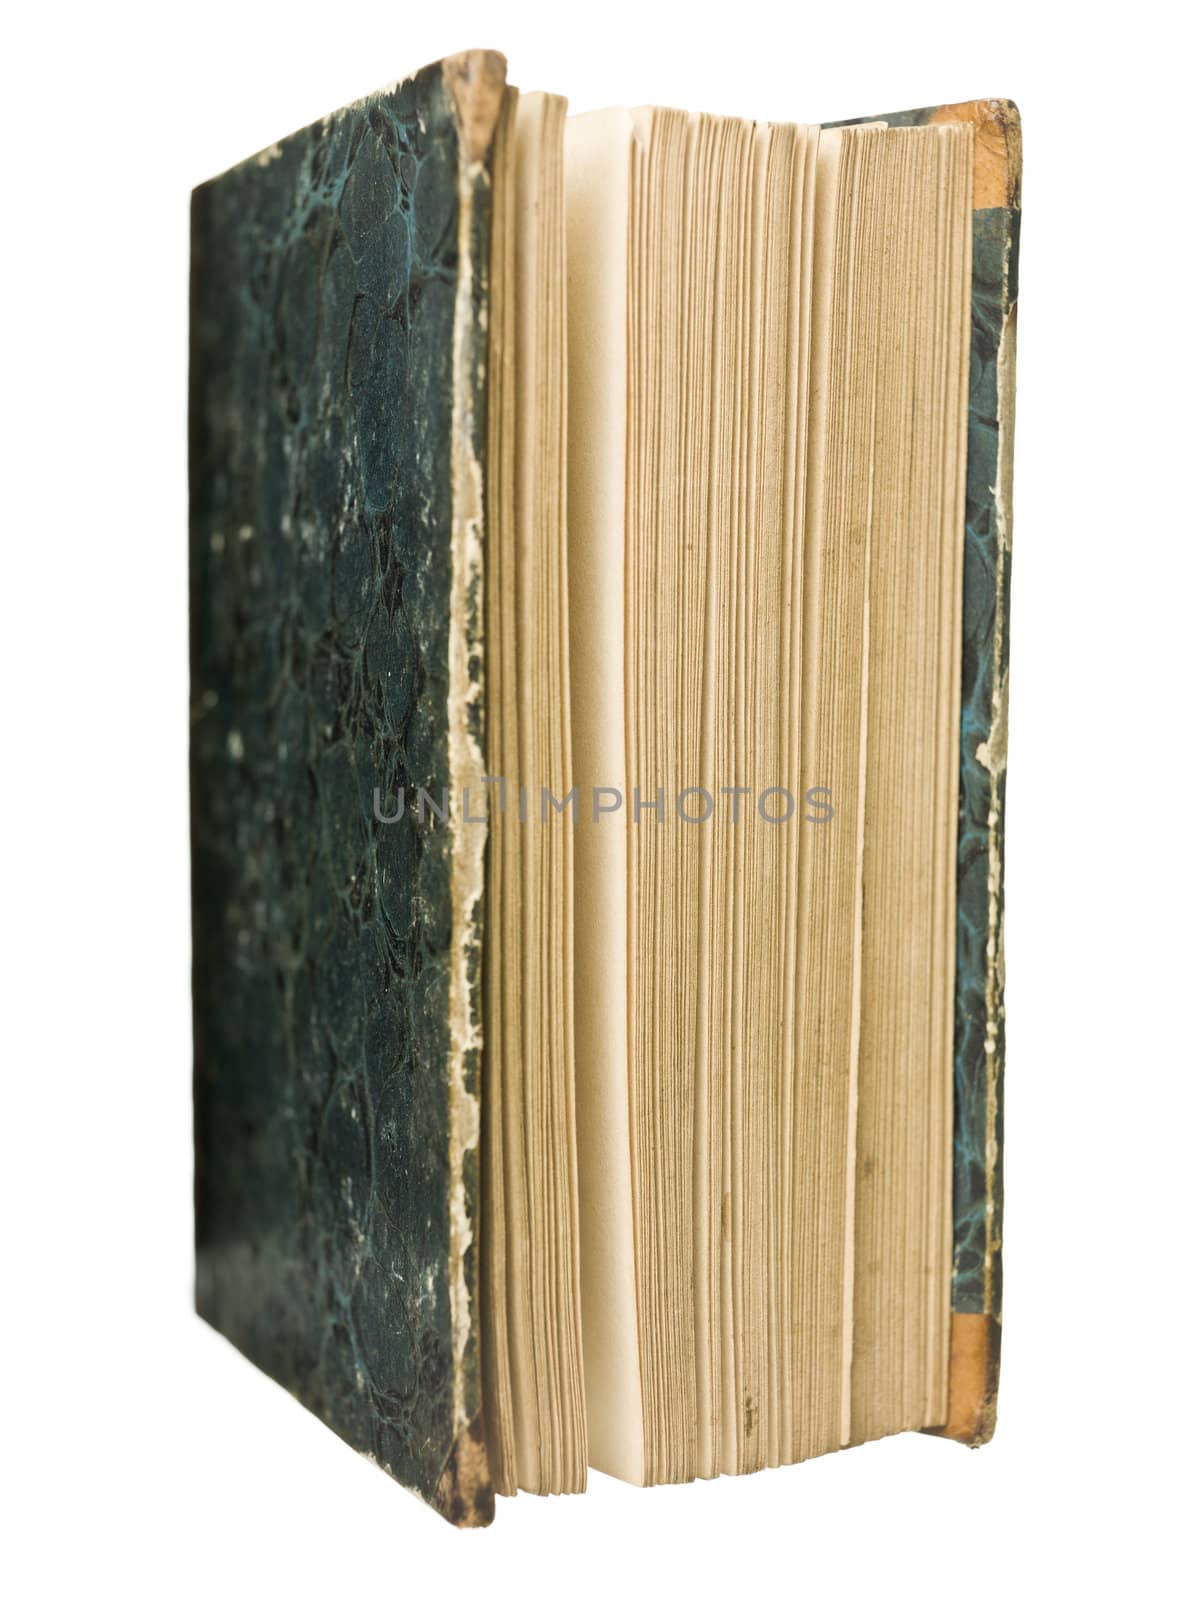 Antique Book isolated on white background